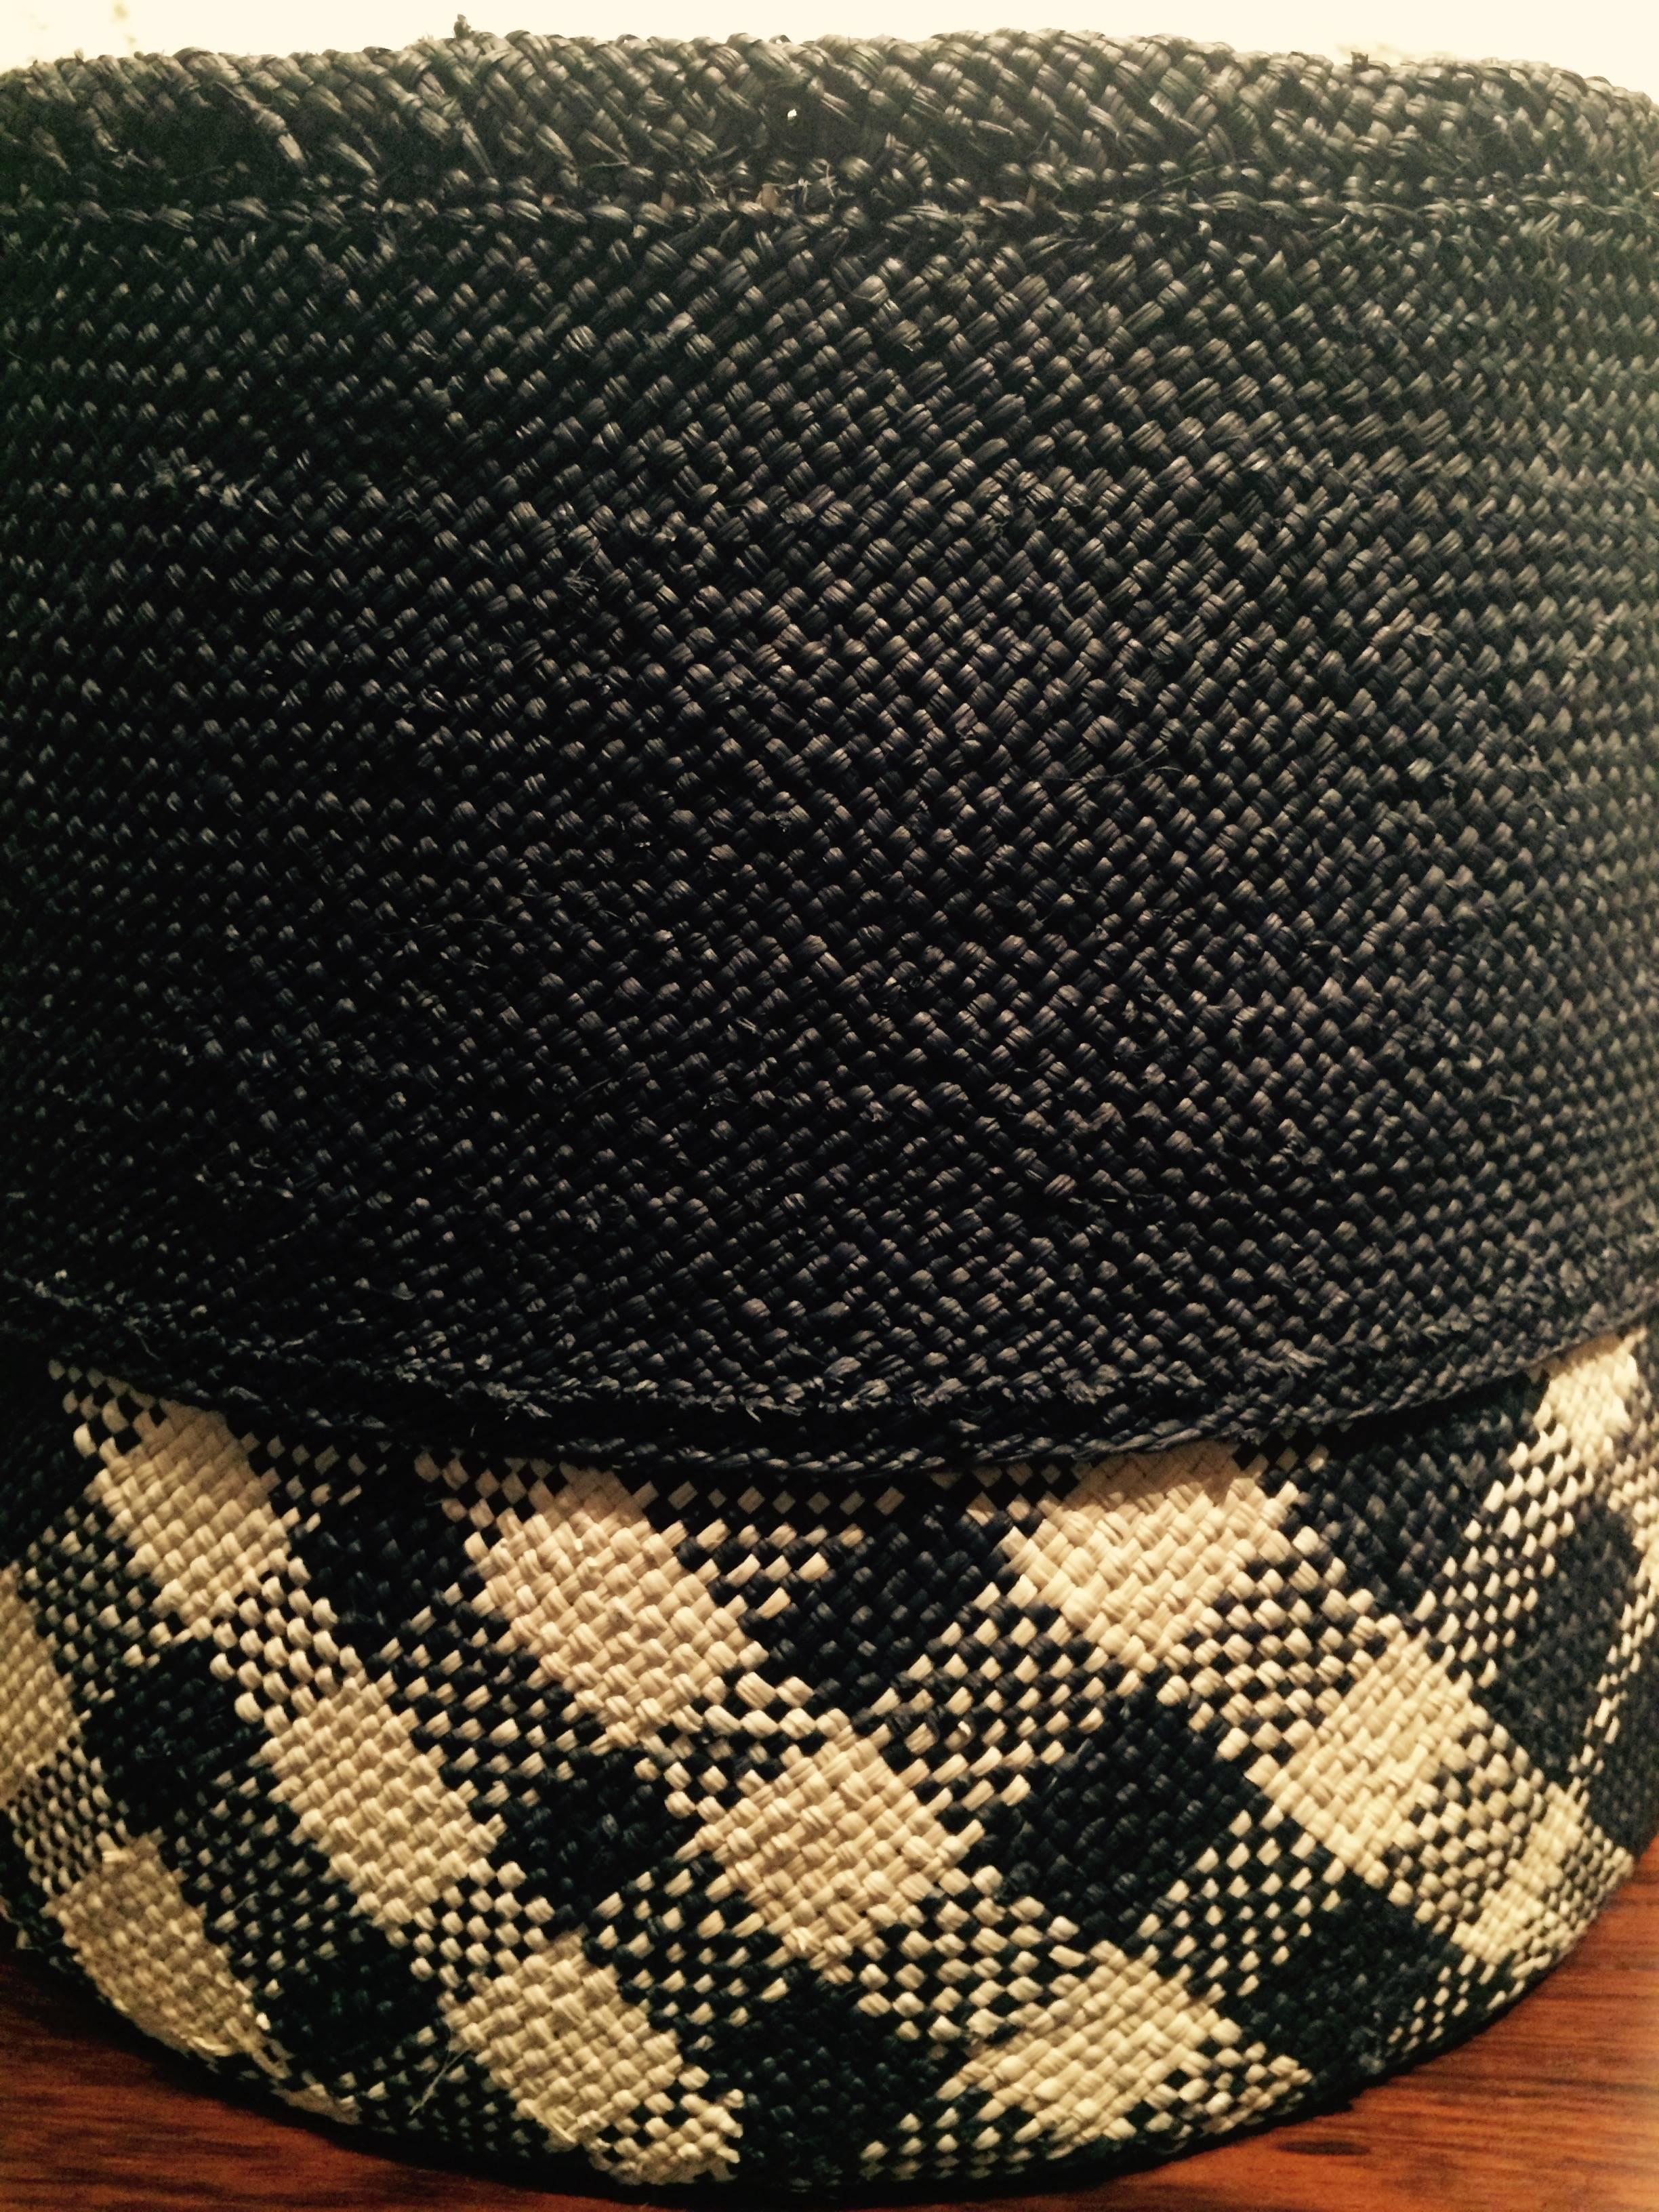 Woven One of a Kind, Handwoven Iraca Basket from Nariño, Colombia For Sale